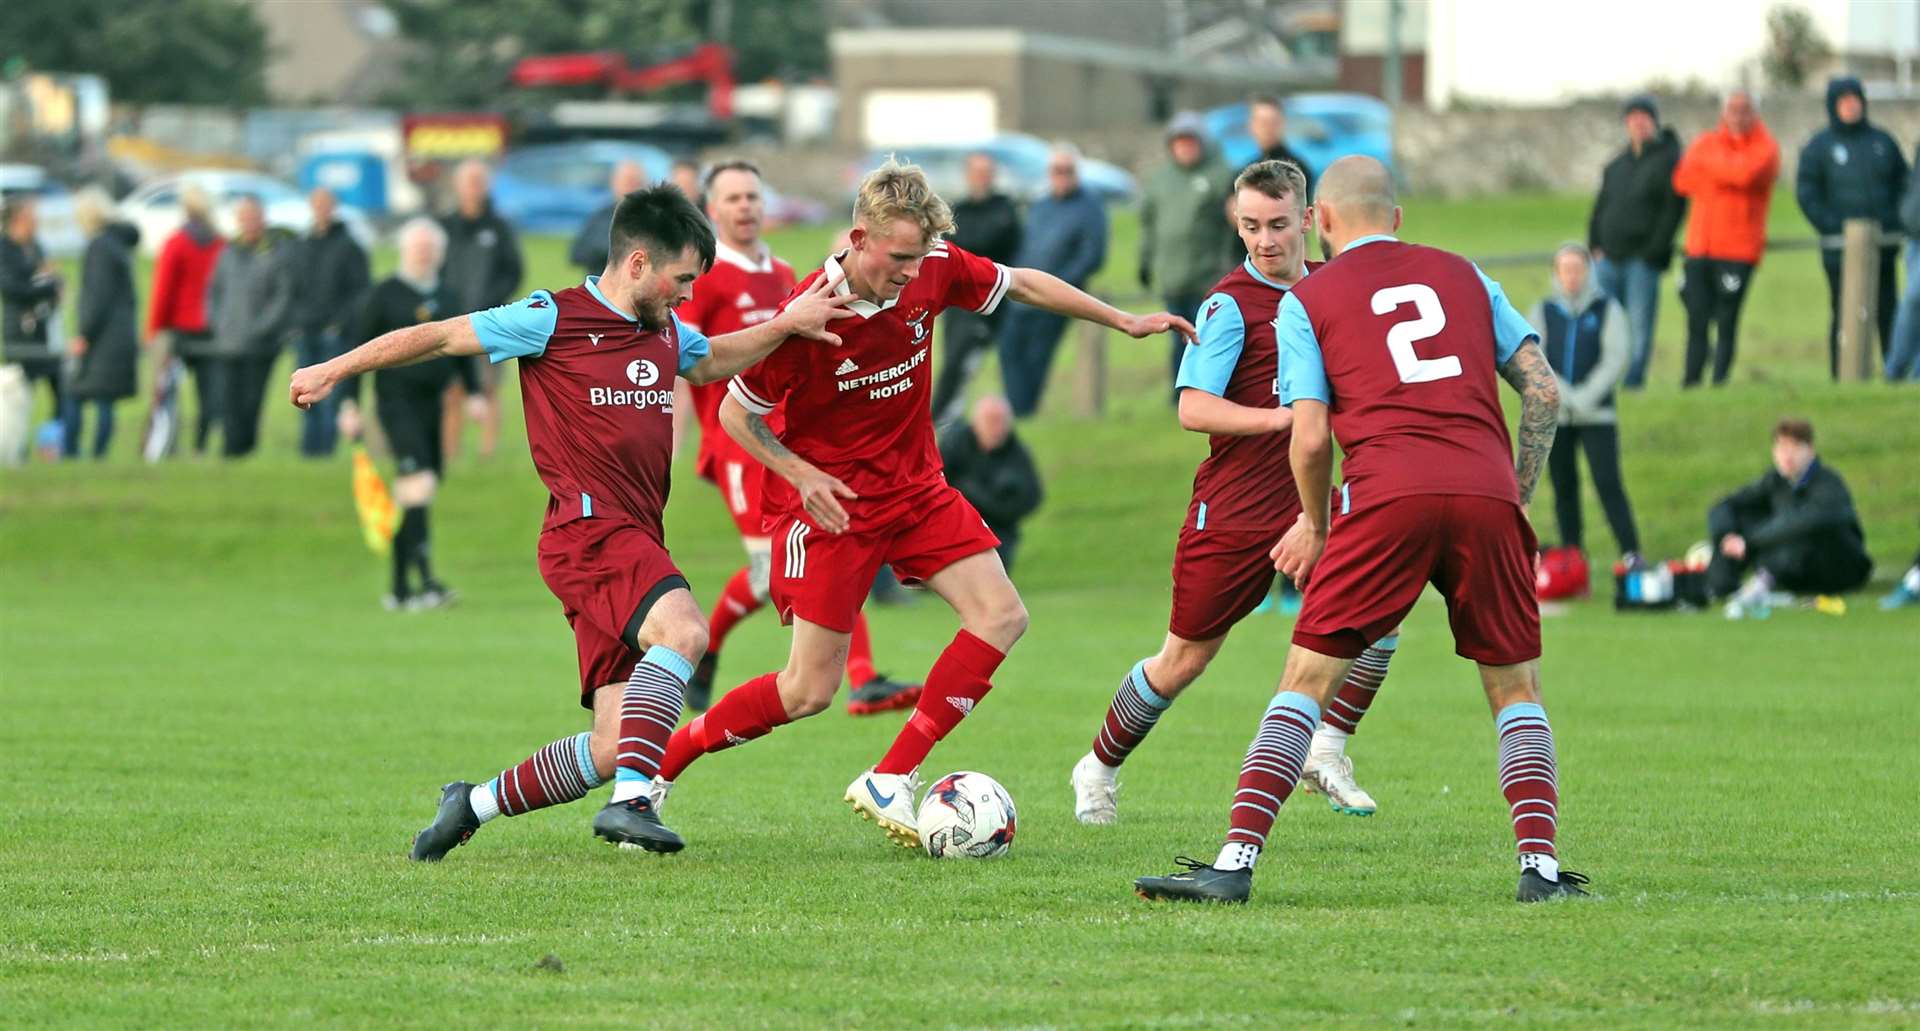 Michael Steven of Wick Groats tries to weave his way through the Pentland United defence. Picture: James Gunn